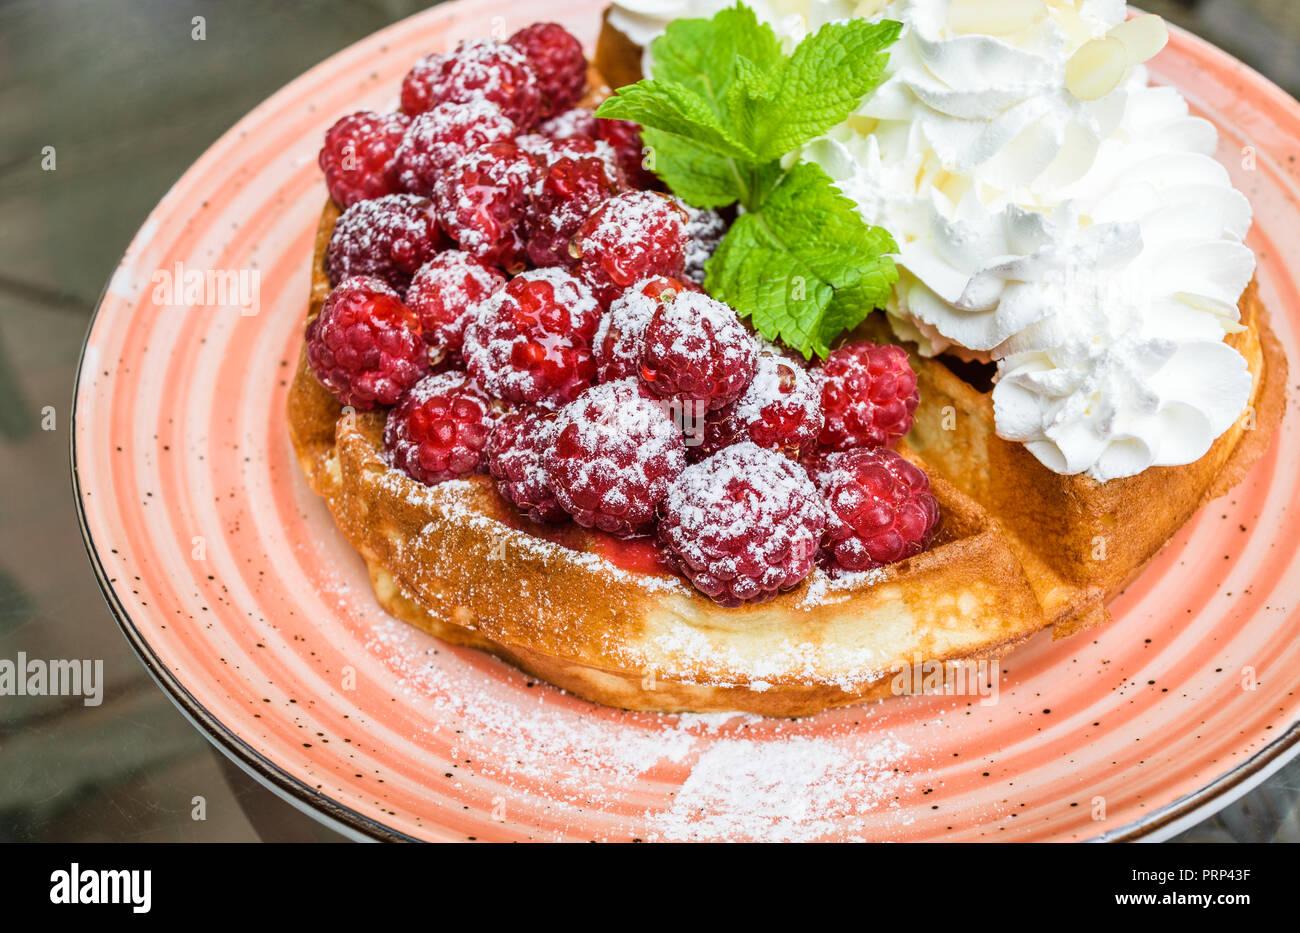 Tasty belgian waffles with fresh raspberries and whipped cream with almond flakes. Decorated with mint leaves and powdered sugar, on orange plate. Del Stock Photo